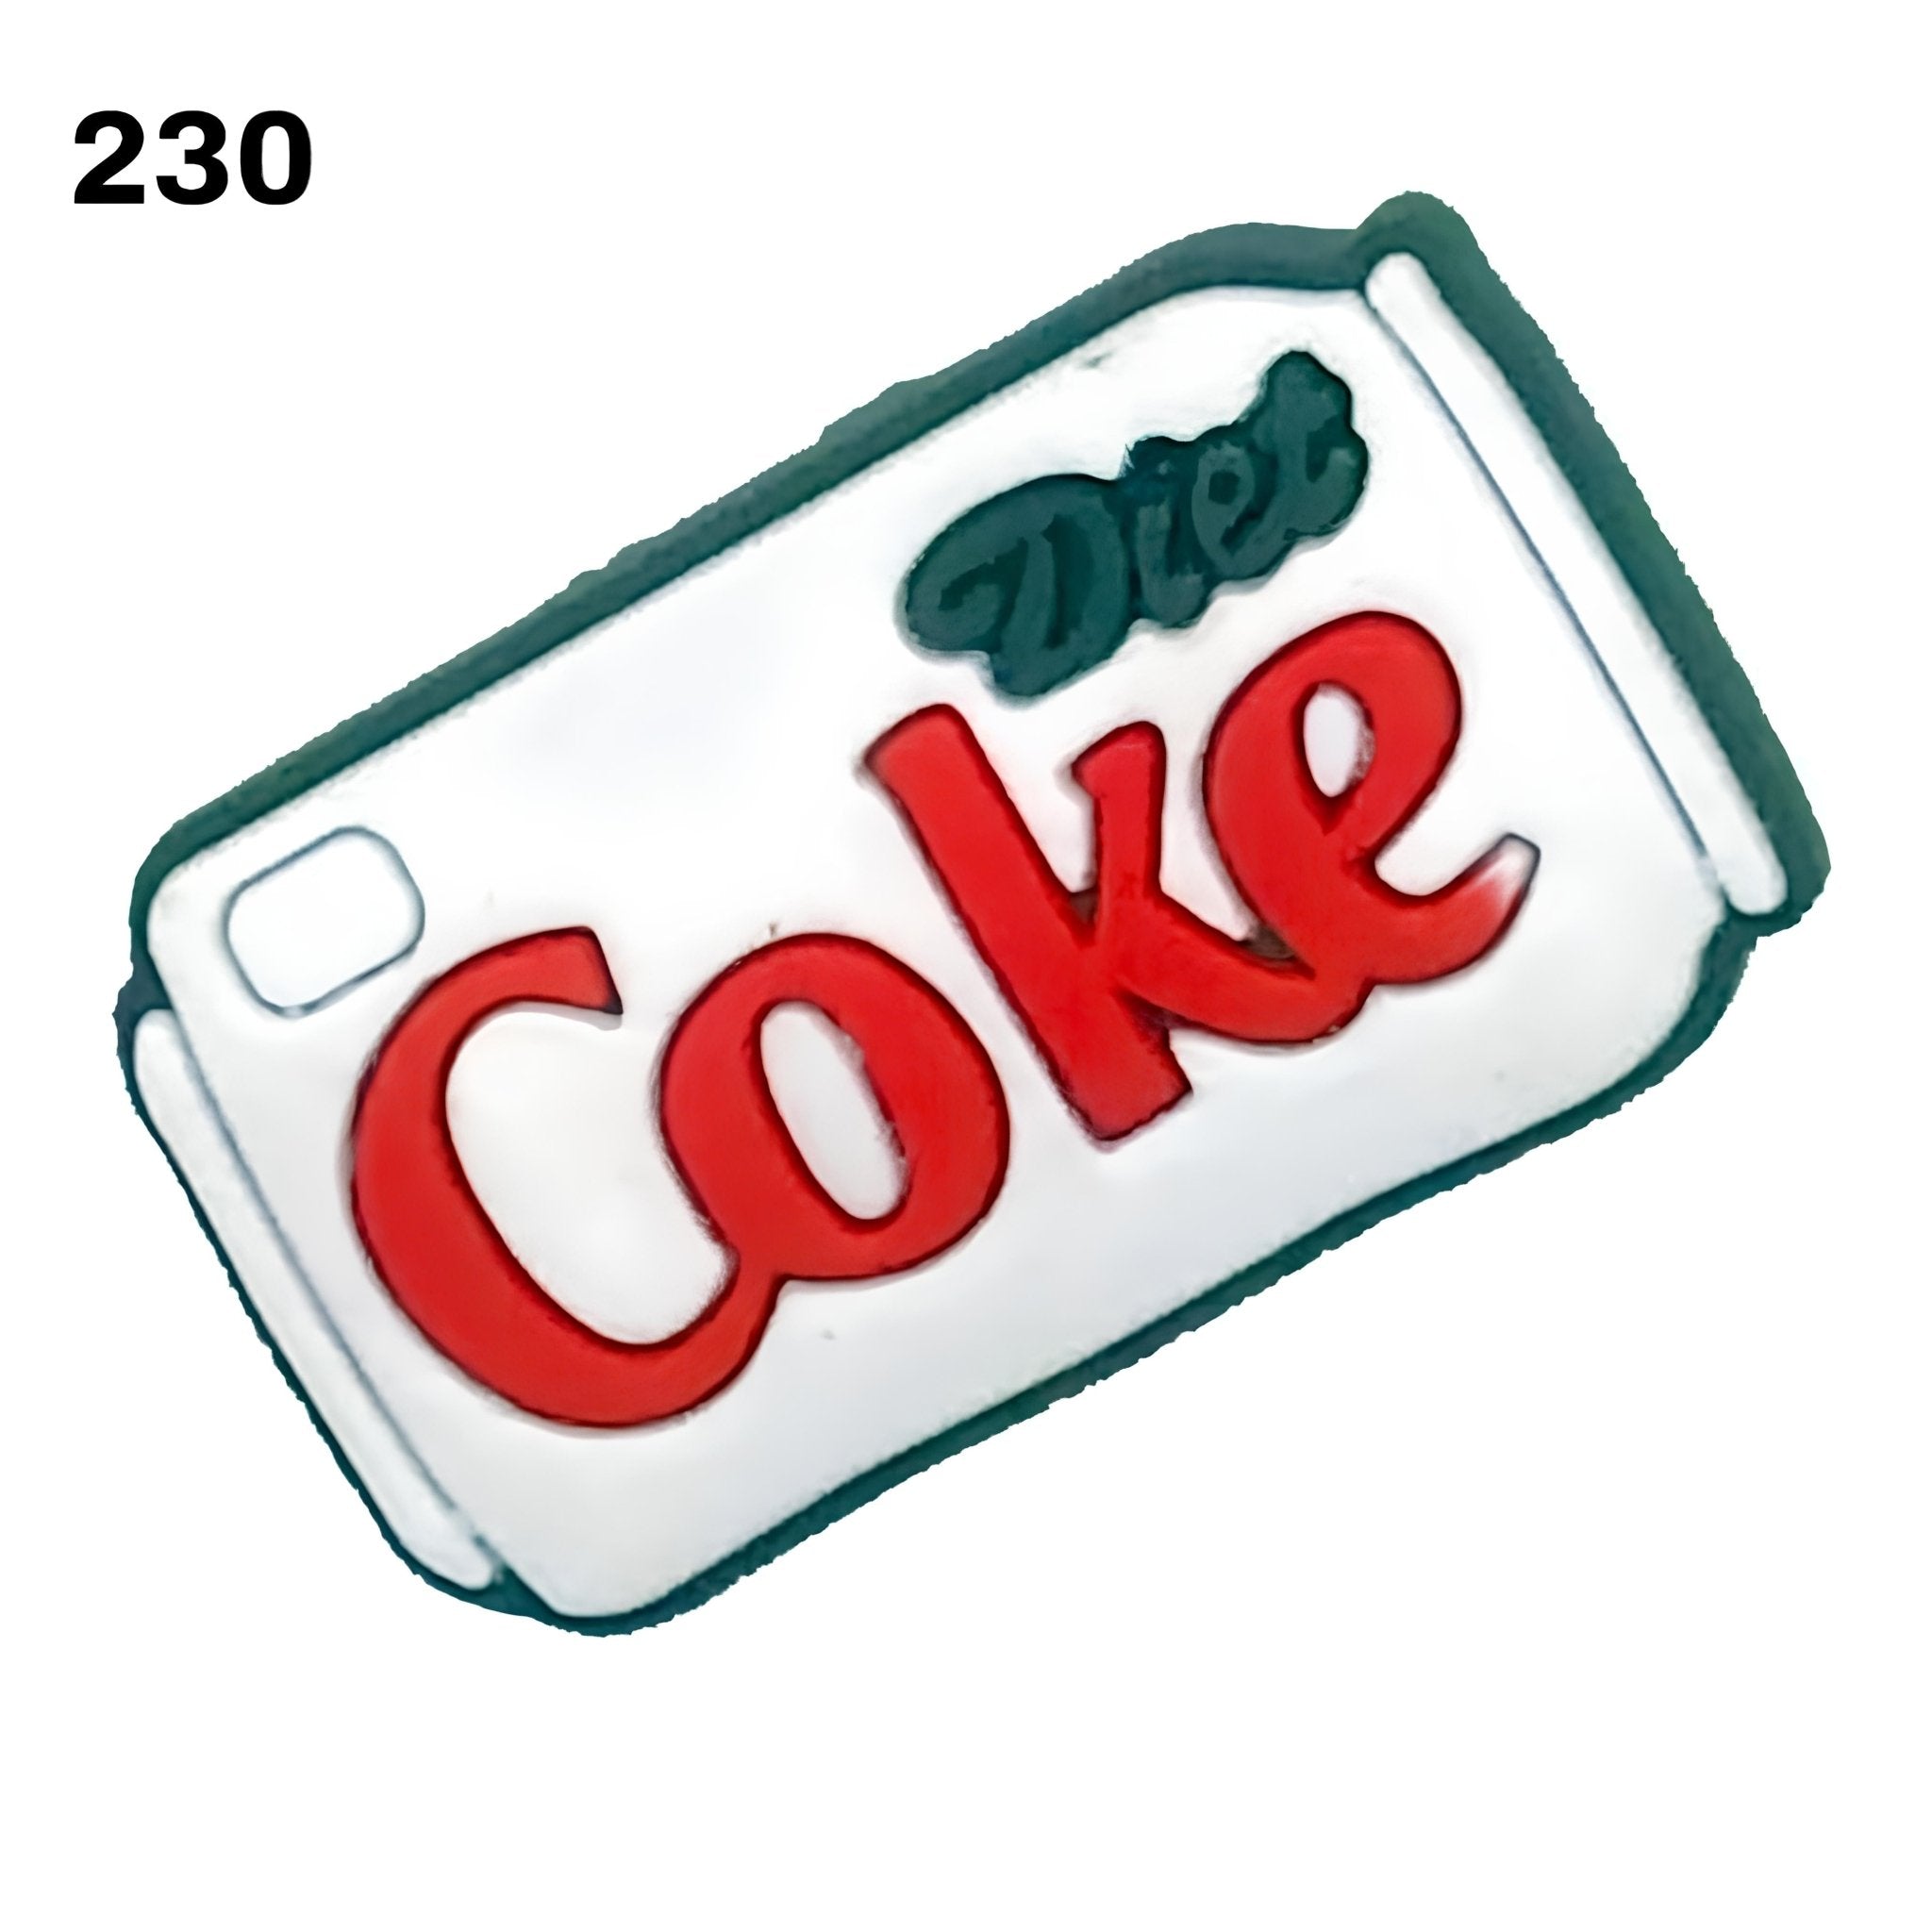 "Coke Can Charm 🥤😄: Level up Refreshment!" - Questsole